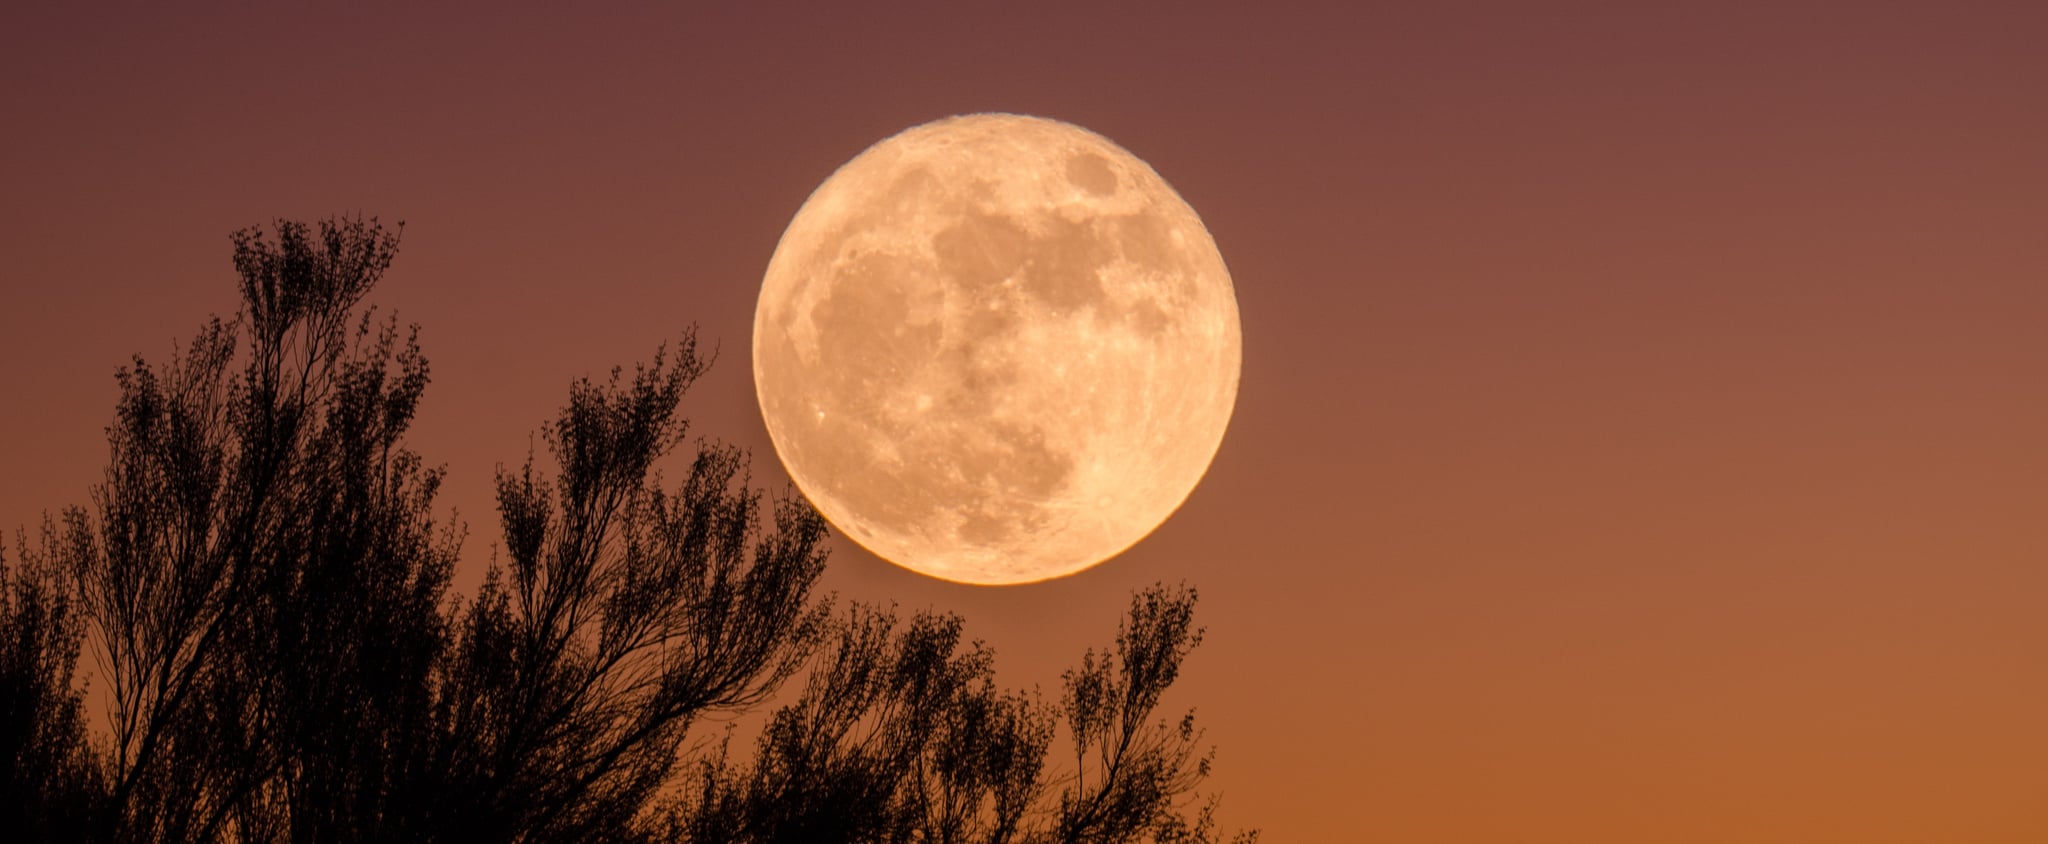 Wolf Moon Meaning 2024: The Spiritual Significance of January's Full Moon